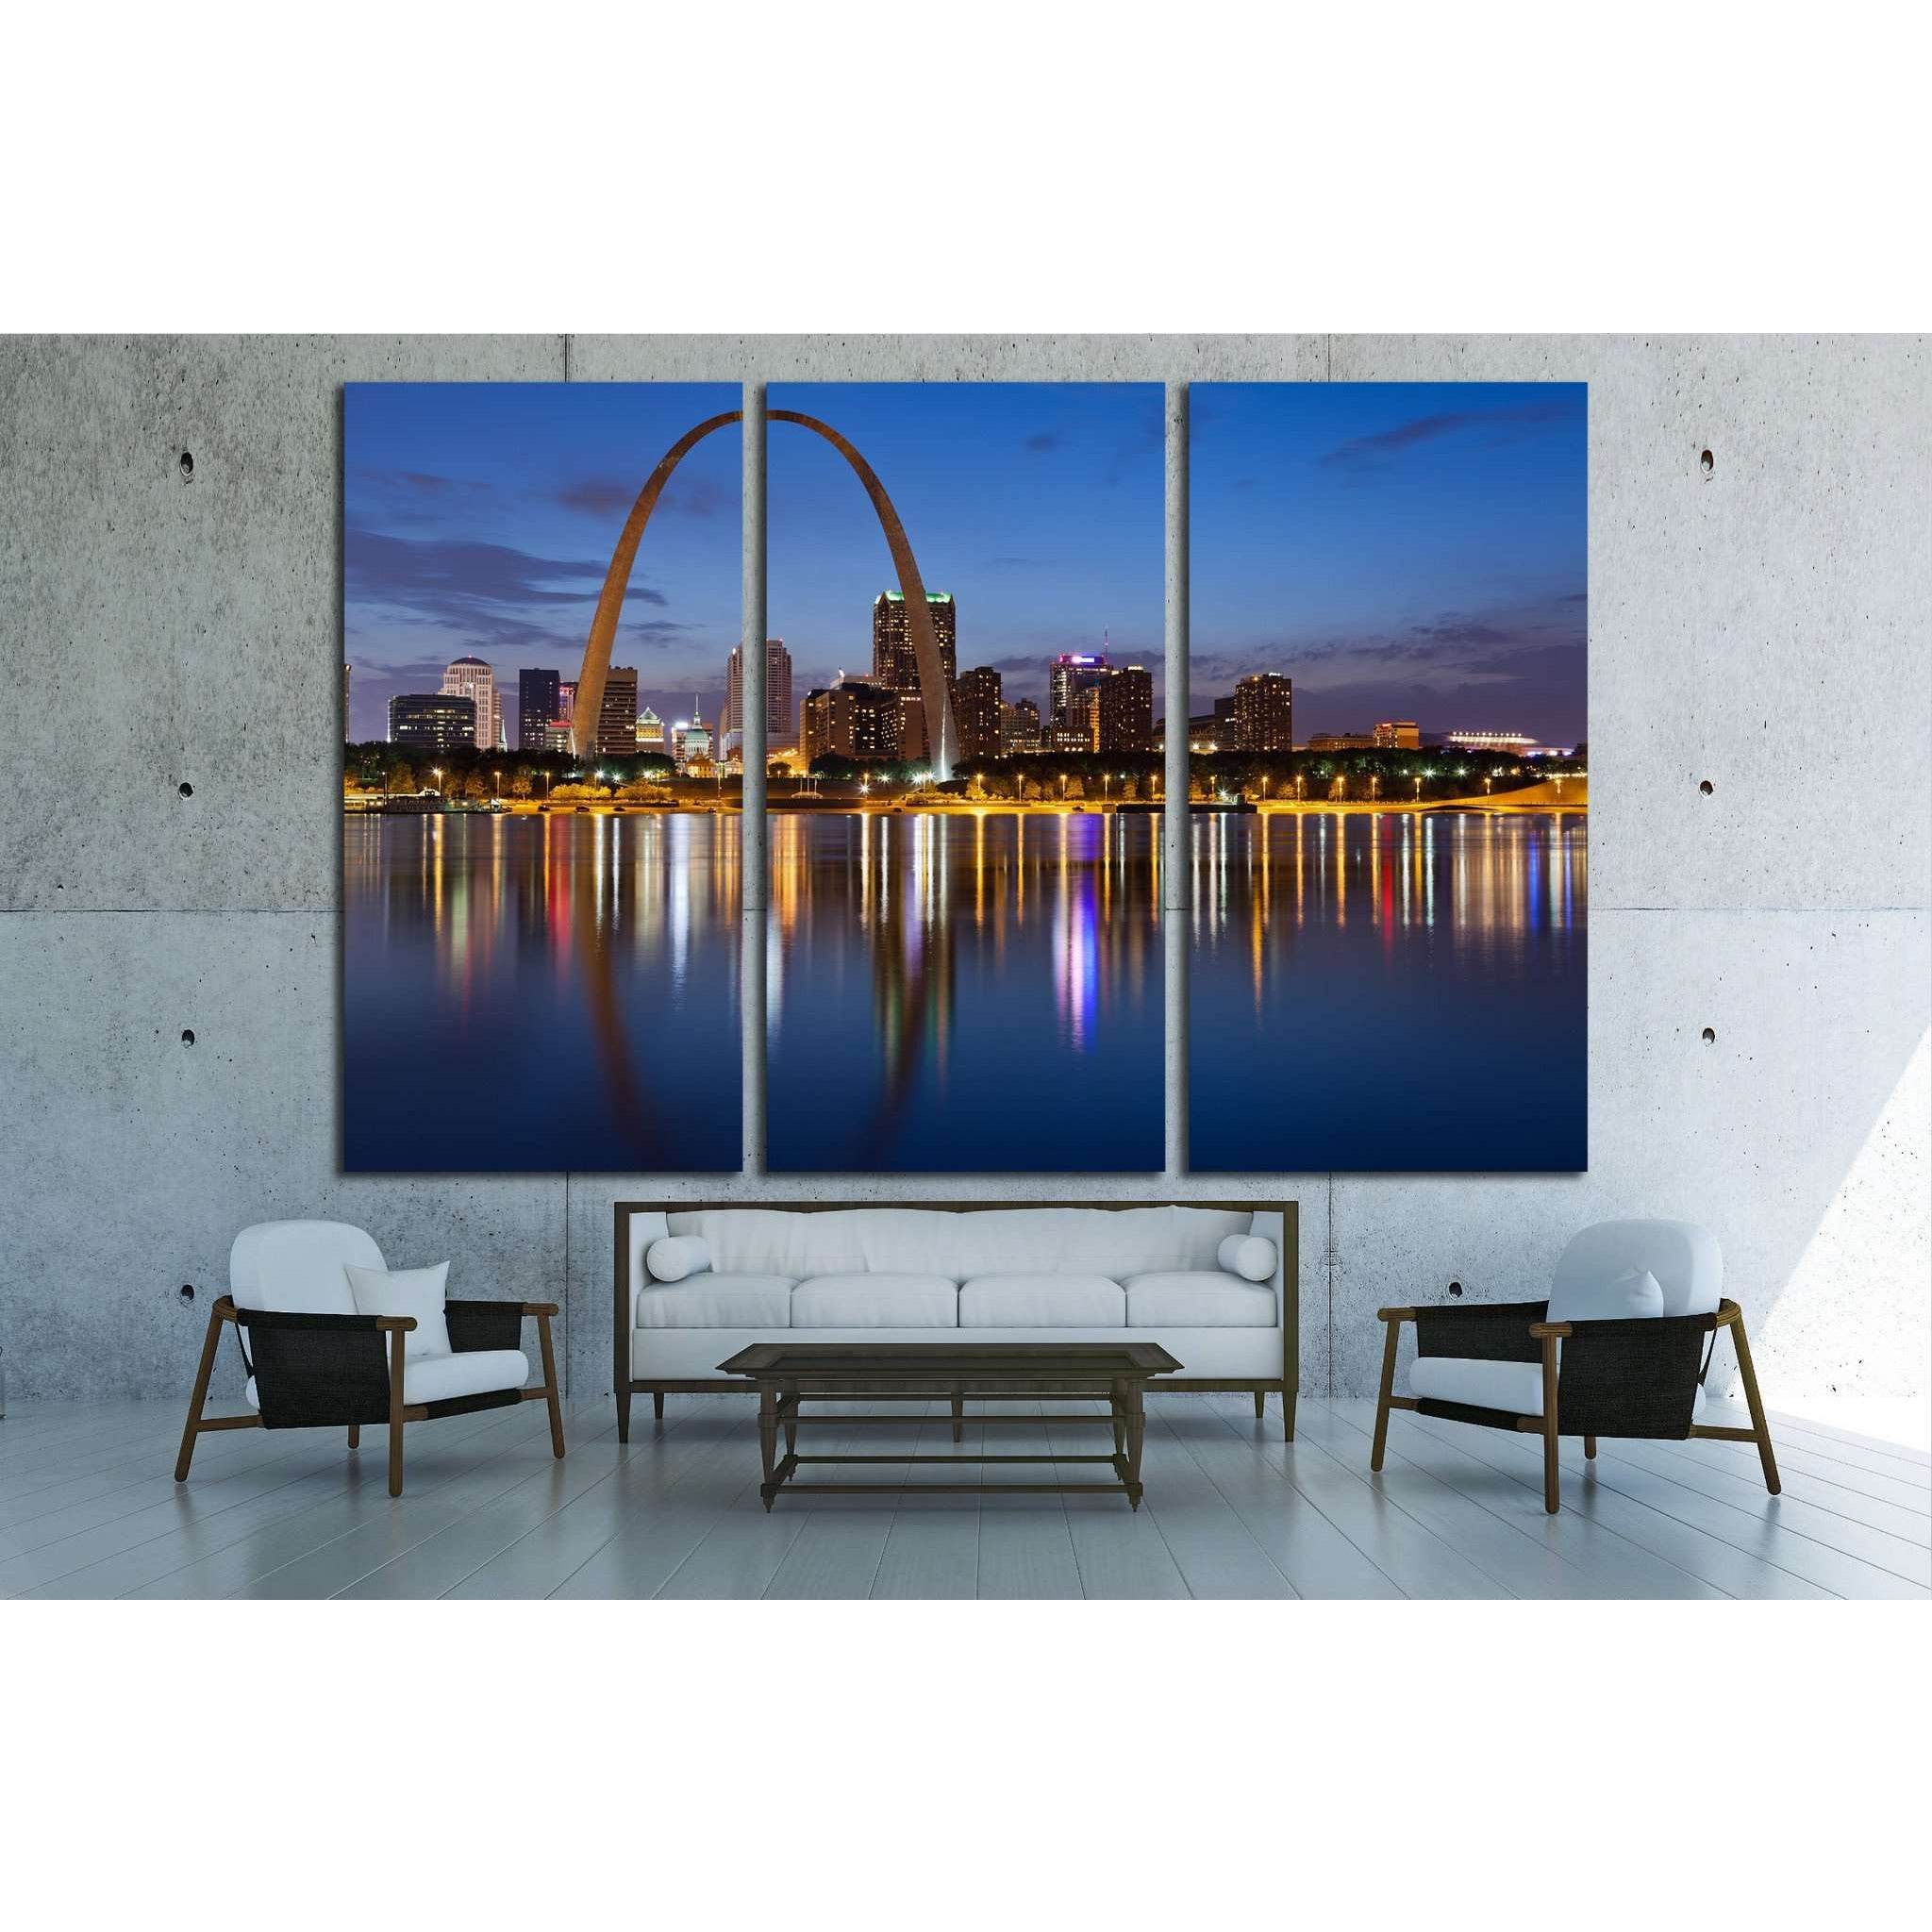 City of St. Louis skyline, Gateway Arch at twilight №2024 Ready to Hang Canvas Print